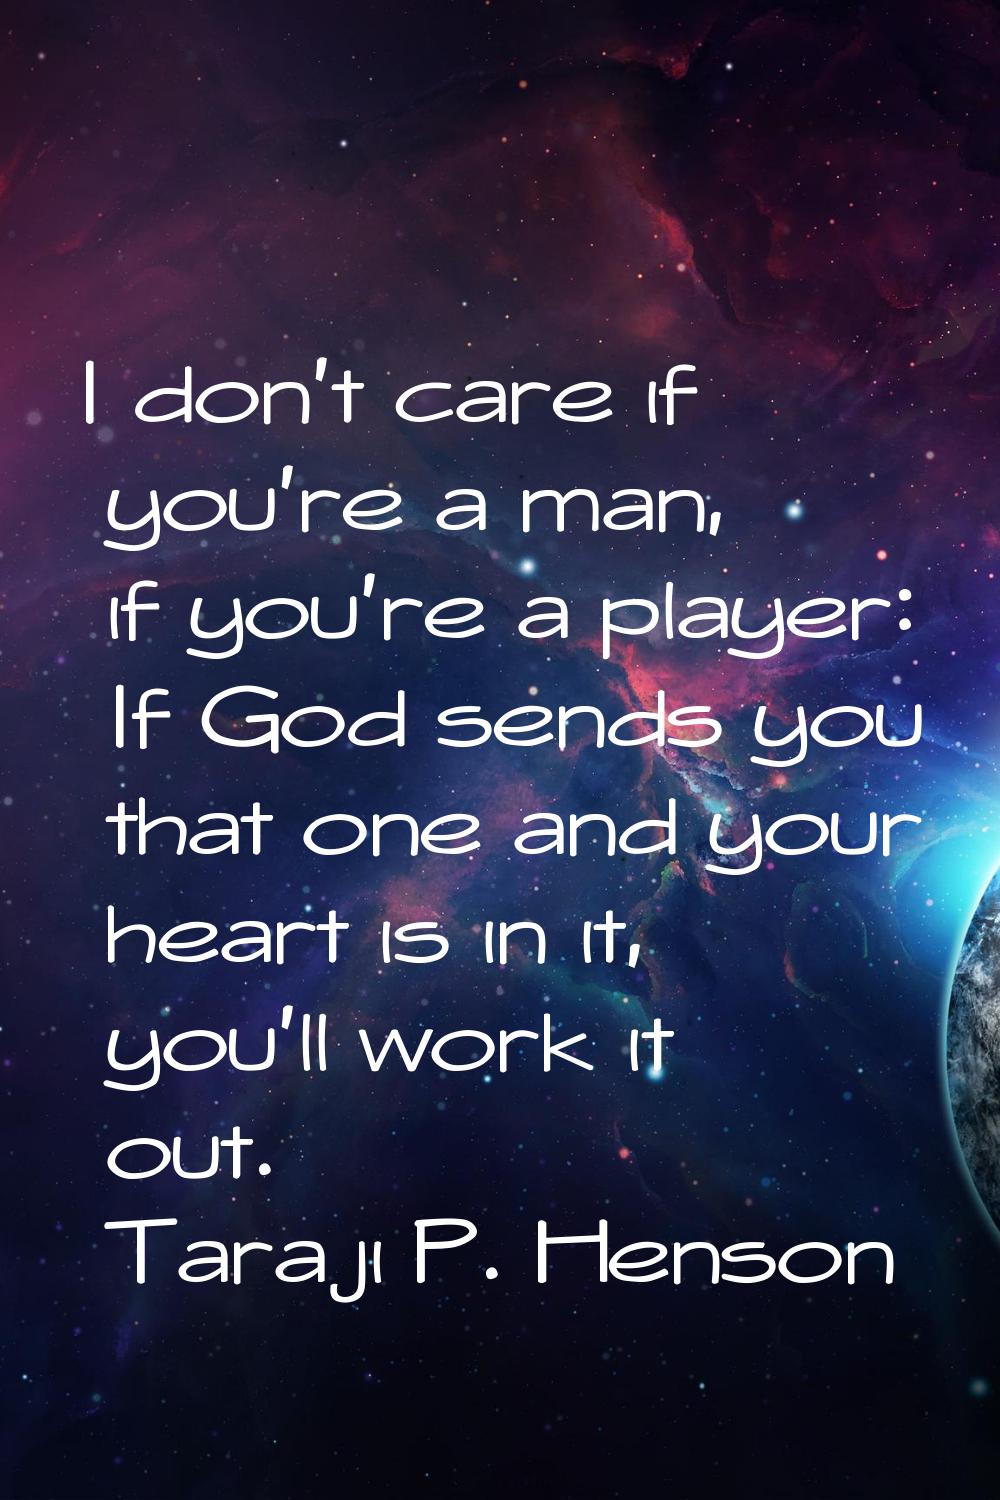 I don't care if you're a man, if you're a player: If God sends you that one and your heart is in it